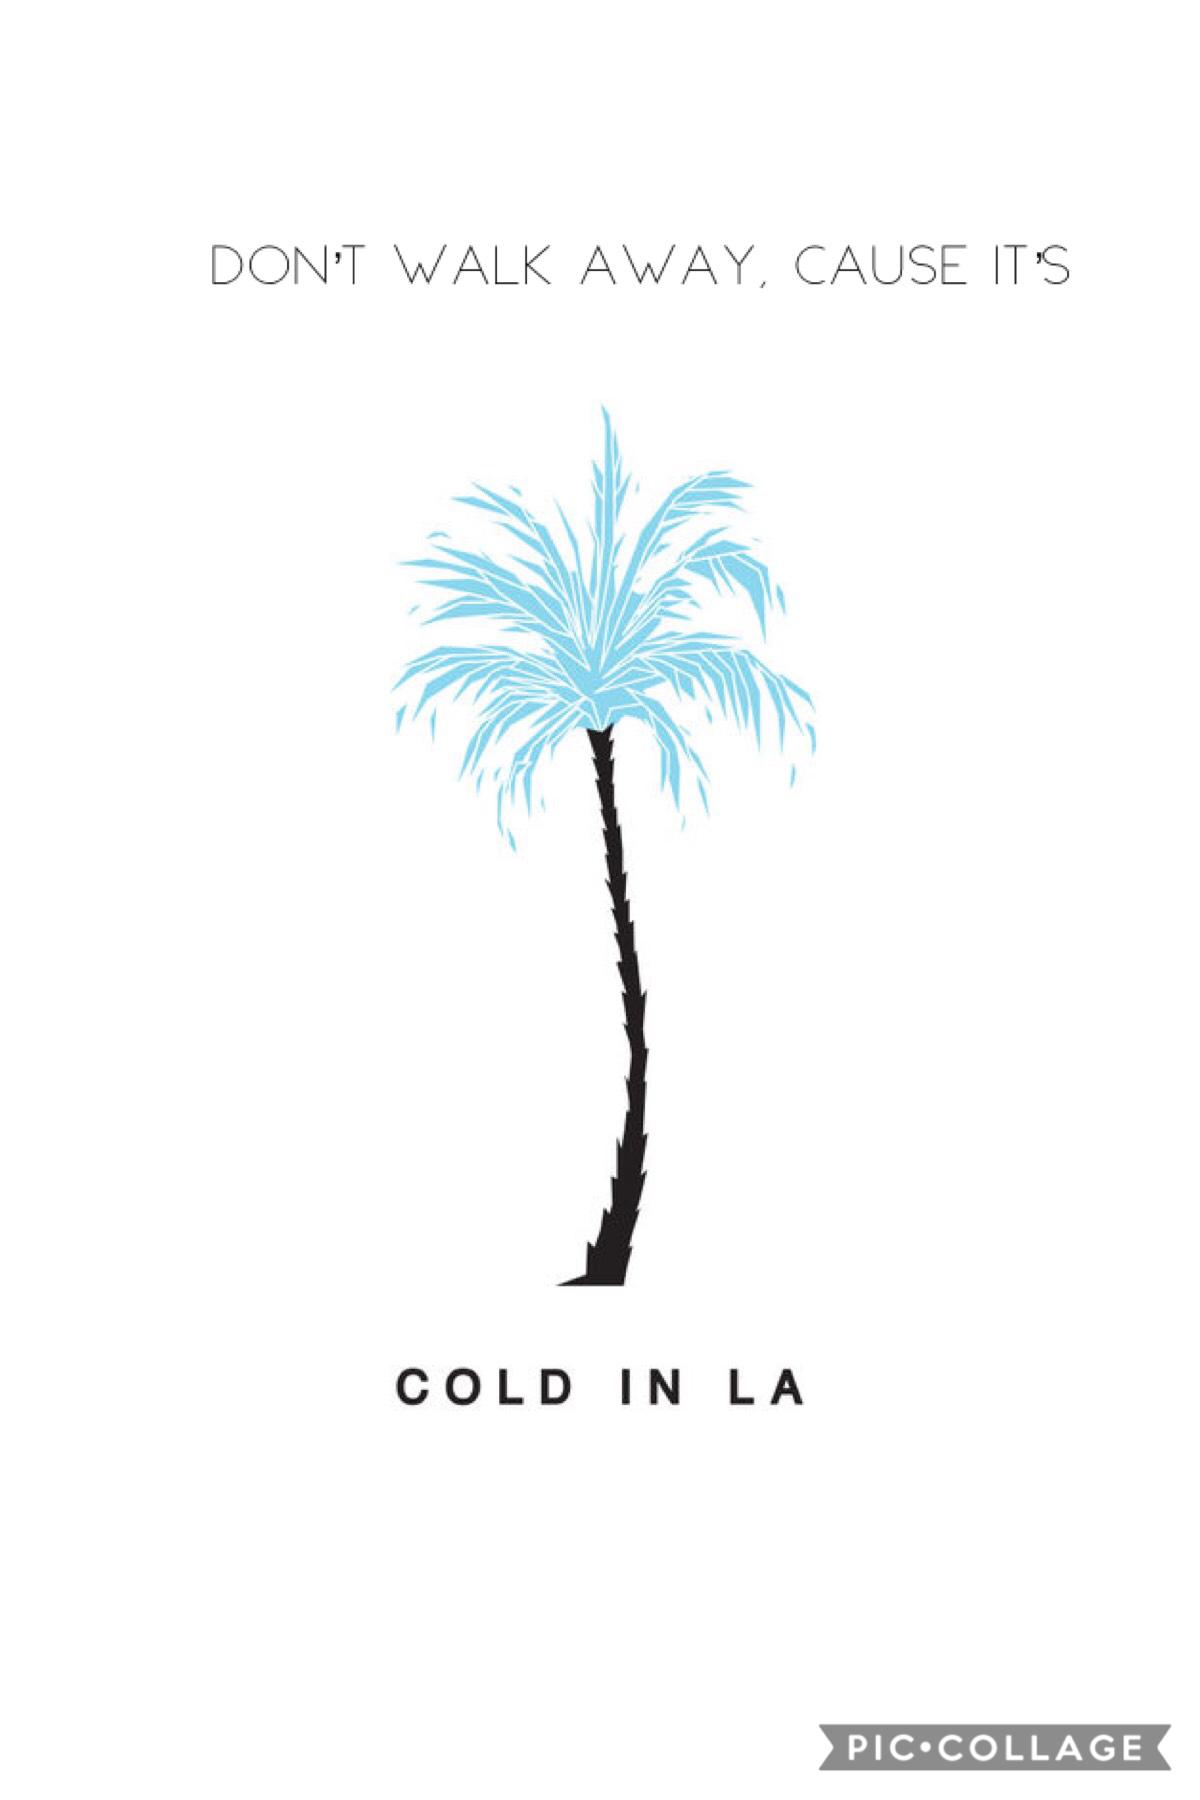 DID YALL LISTEN TO COLD IN LA?! ITS A MIGHTY BOP AND WE LOVE THAT ALL THE BOYS AND ONLY THE BOYS WROTE THE SONG⚫️💜💙